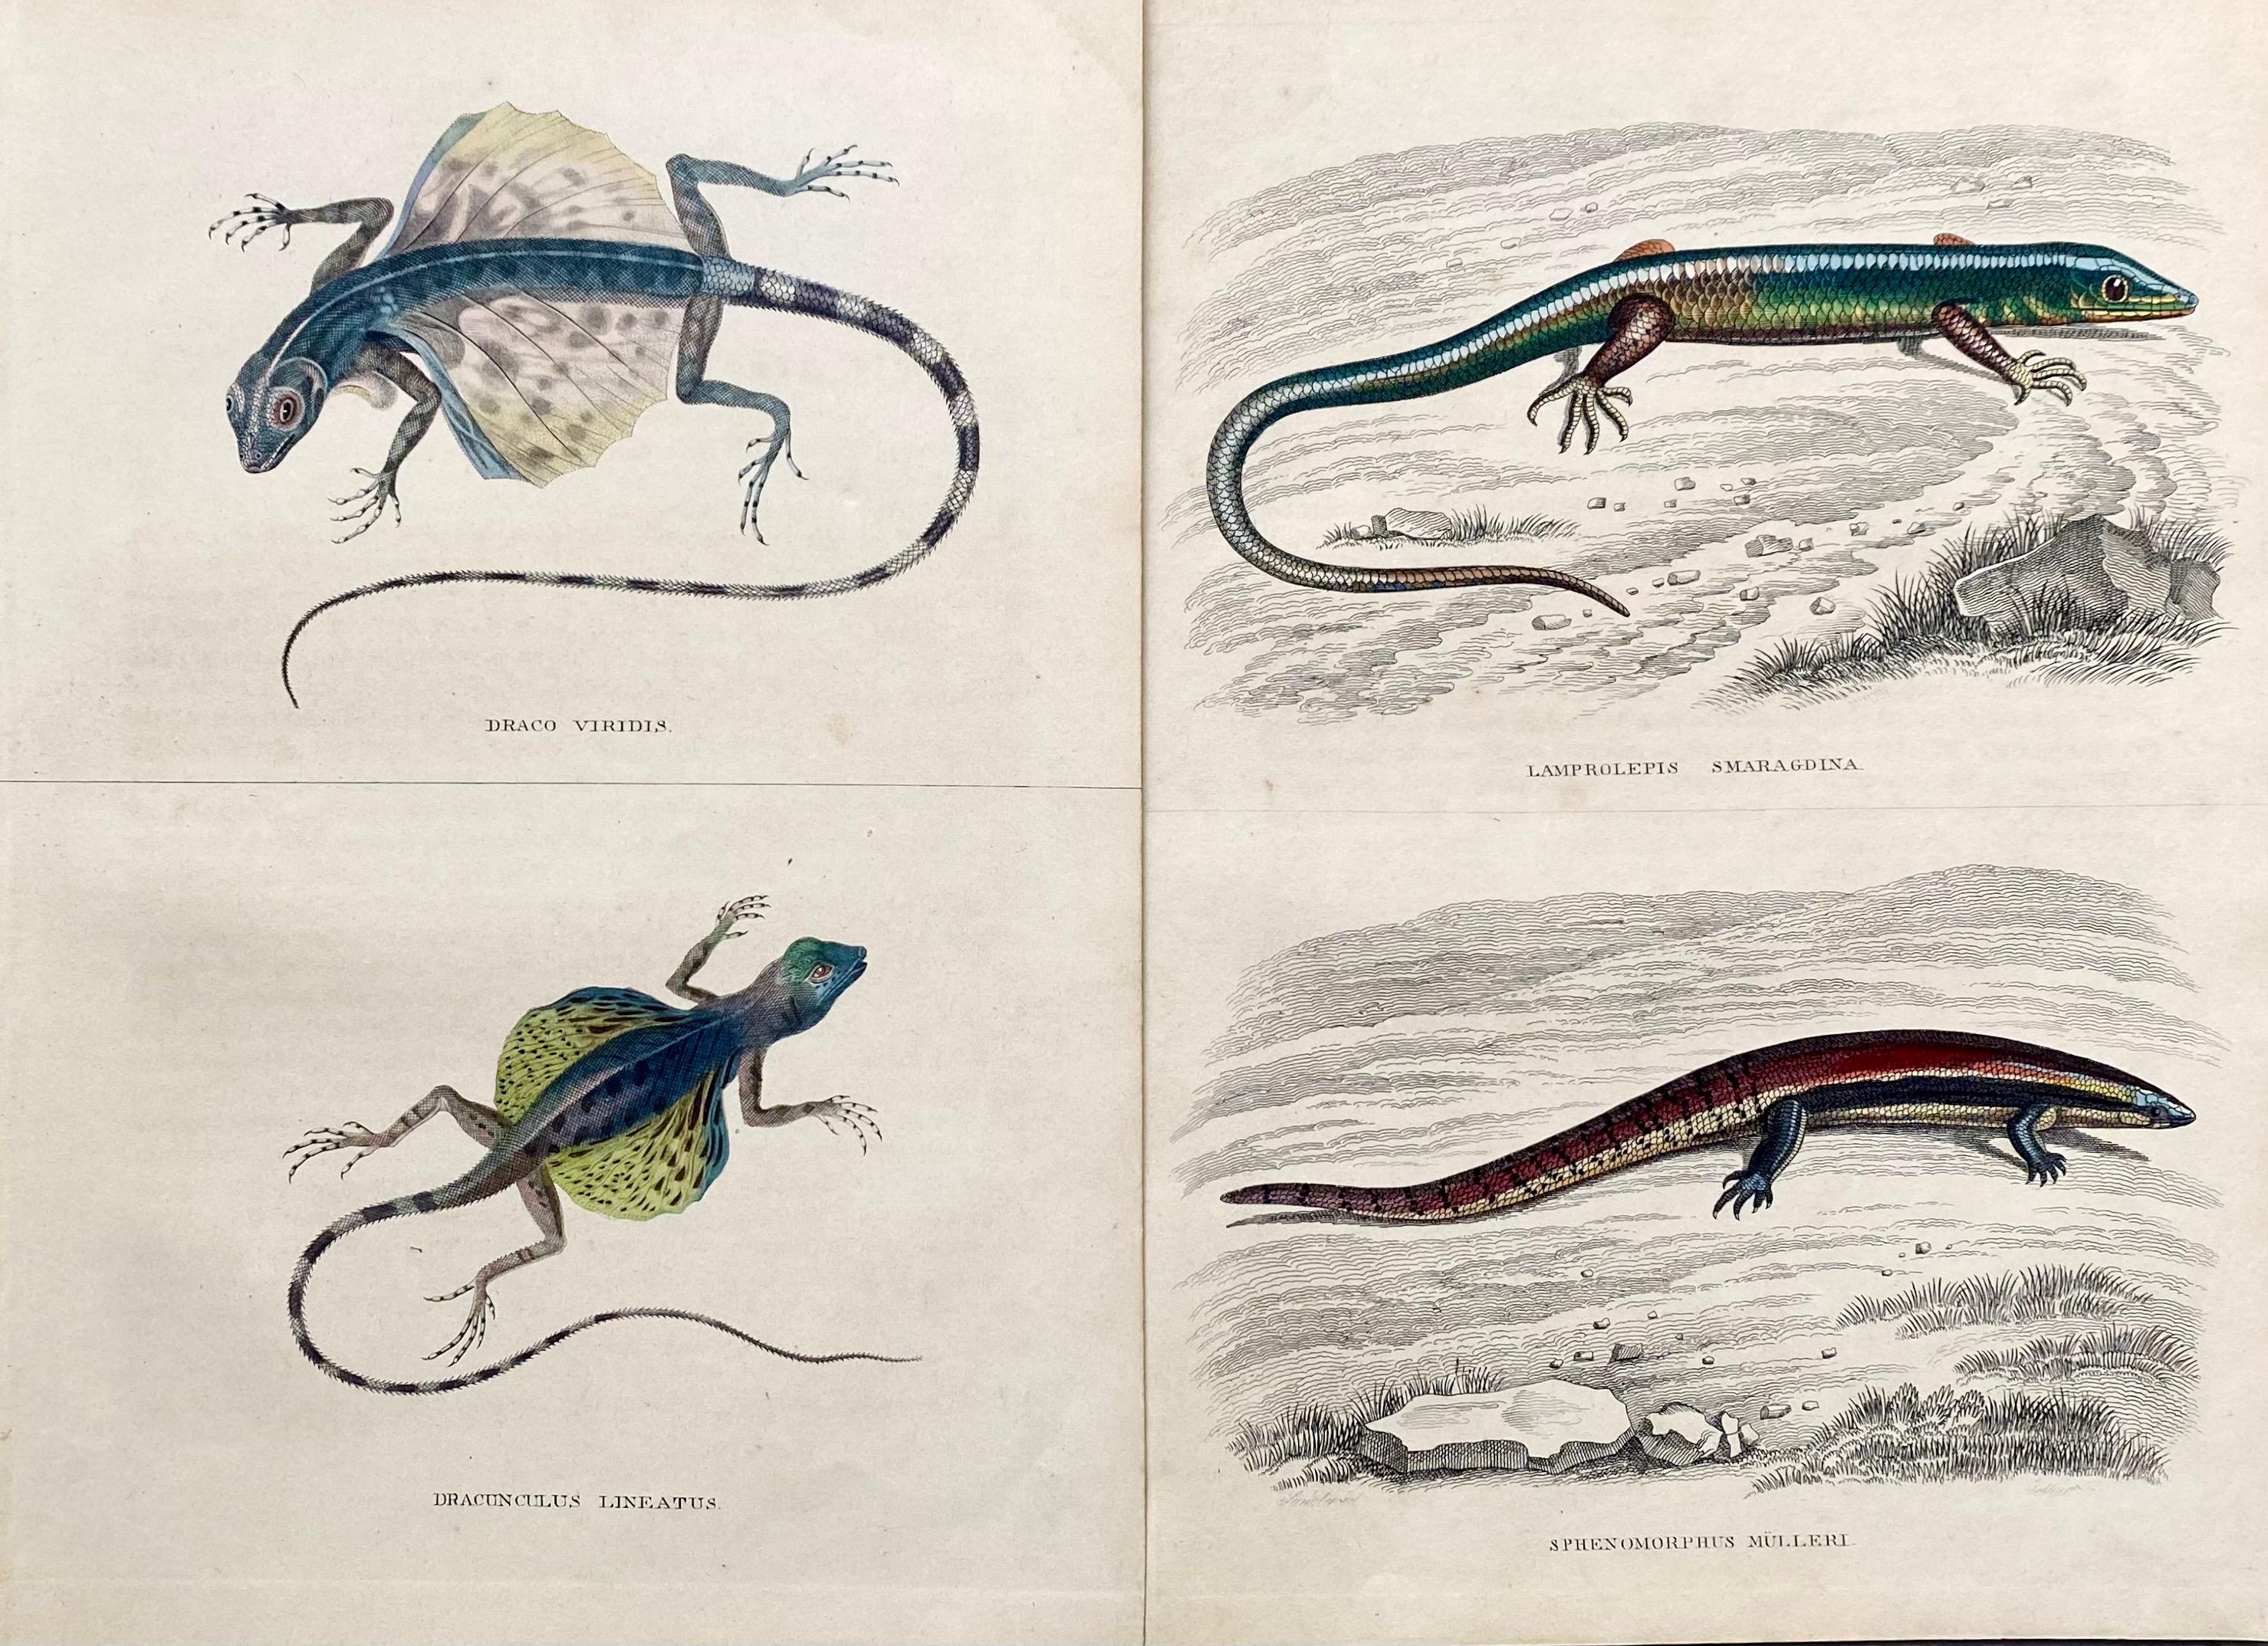 Sir William Jardine, 7th Baronet (after) Landscape Print - Lizard Antique Hand Coloured Print - Tropical Exotic Lizards Rare Reptiles 